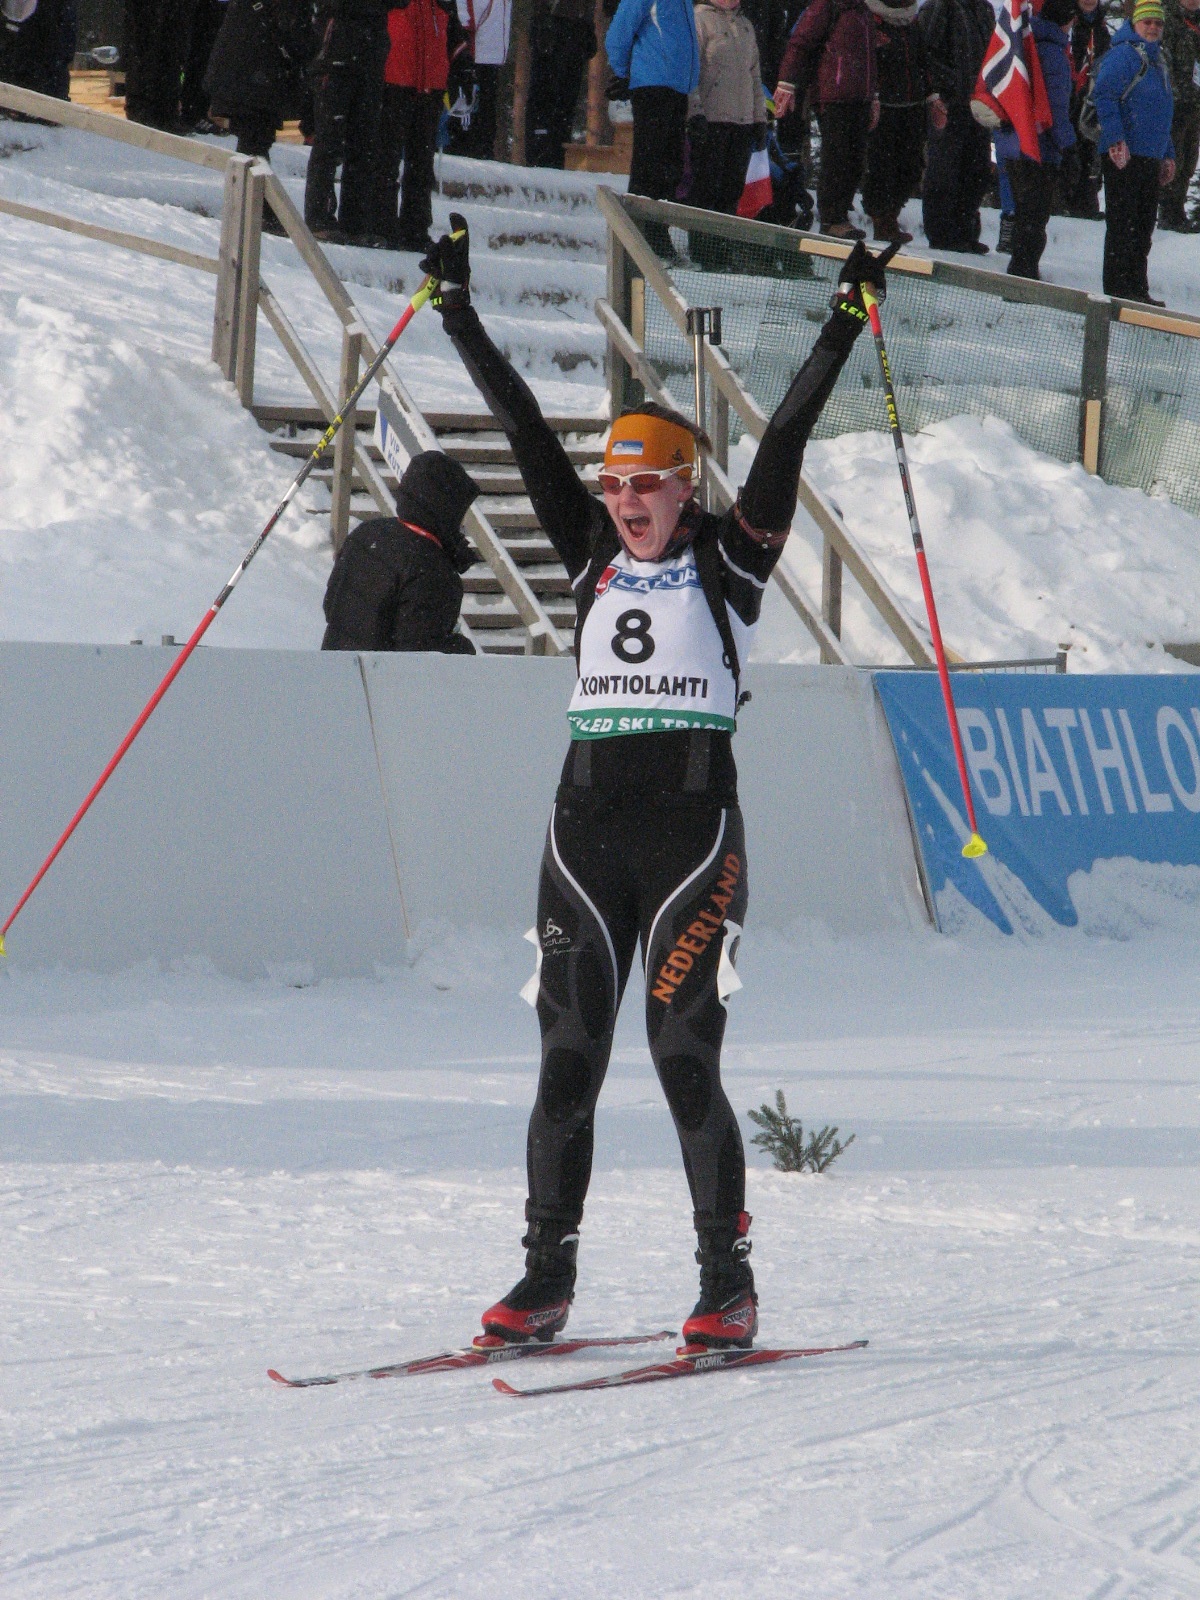 Gaim, Sloof Come From Behind for Women’s Pursuit Titles at Biathlon World Juniors